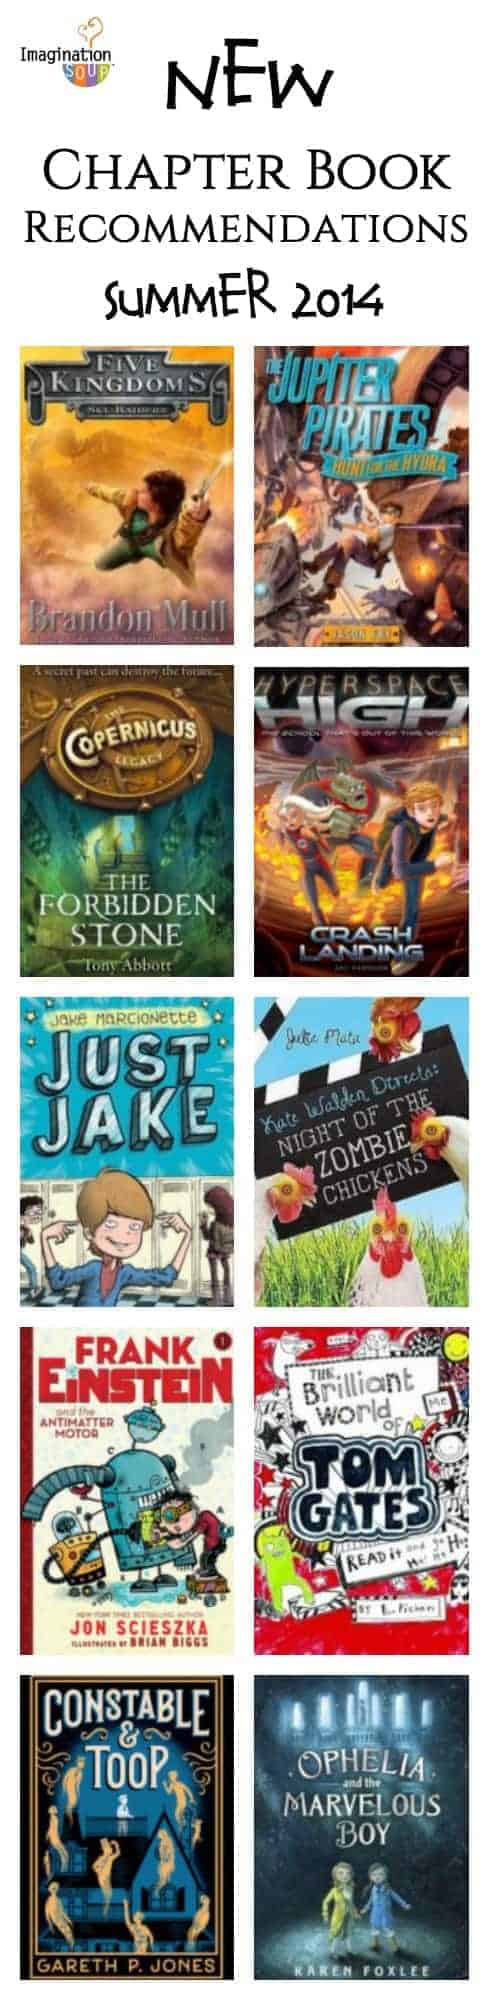 new chapter book recommendations for kids ages 8 and up